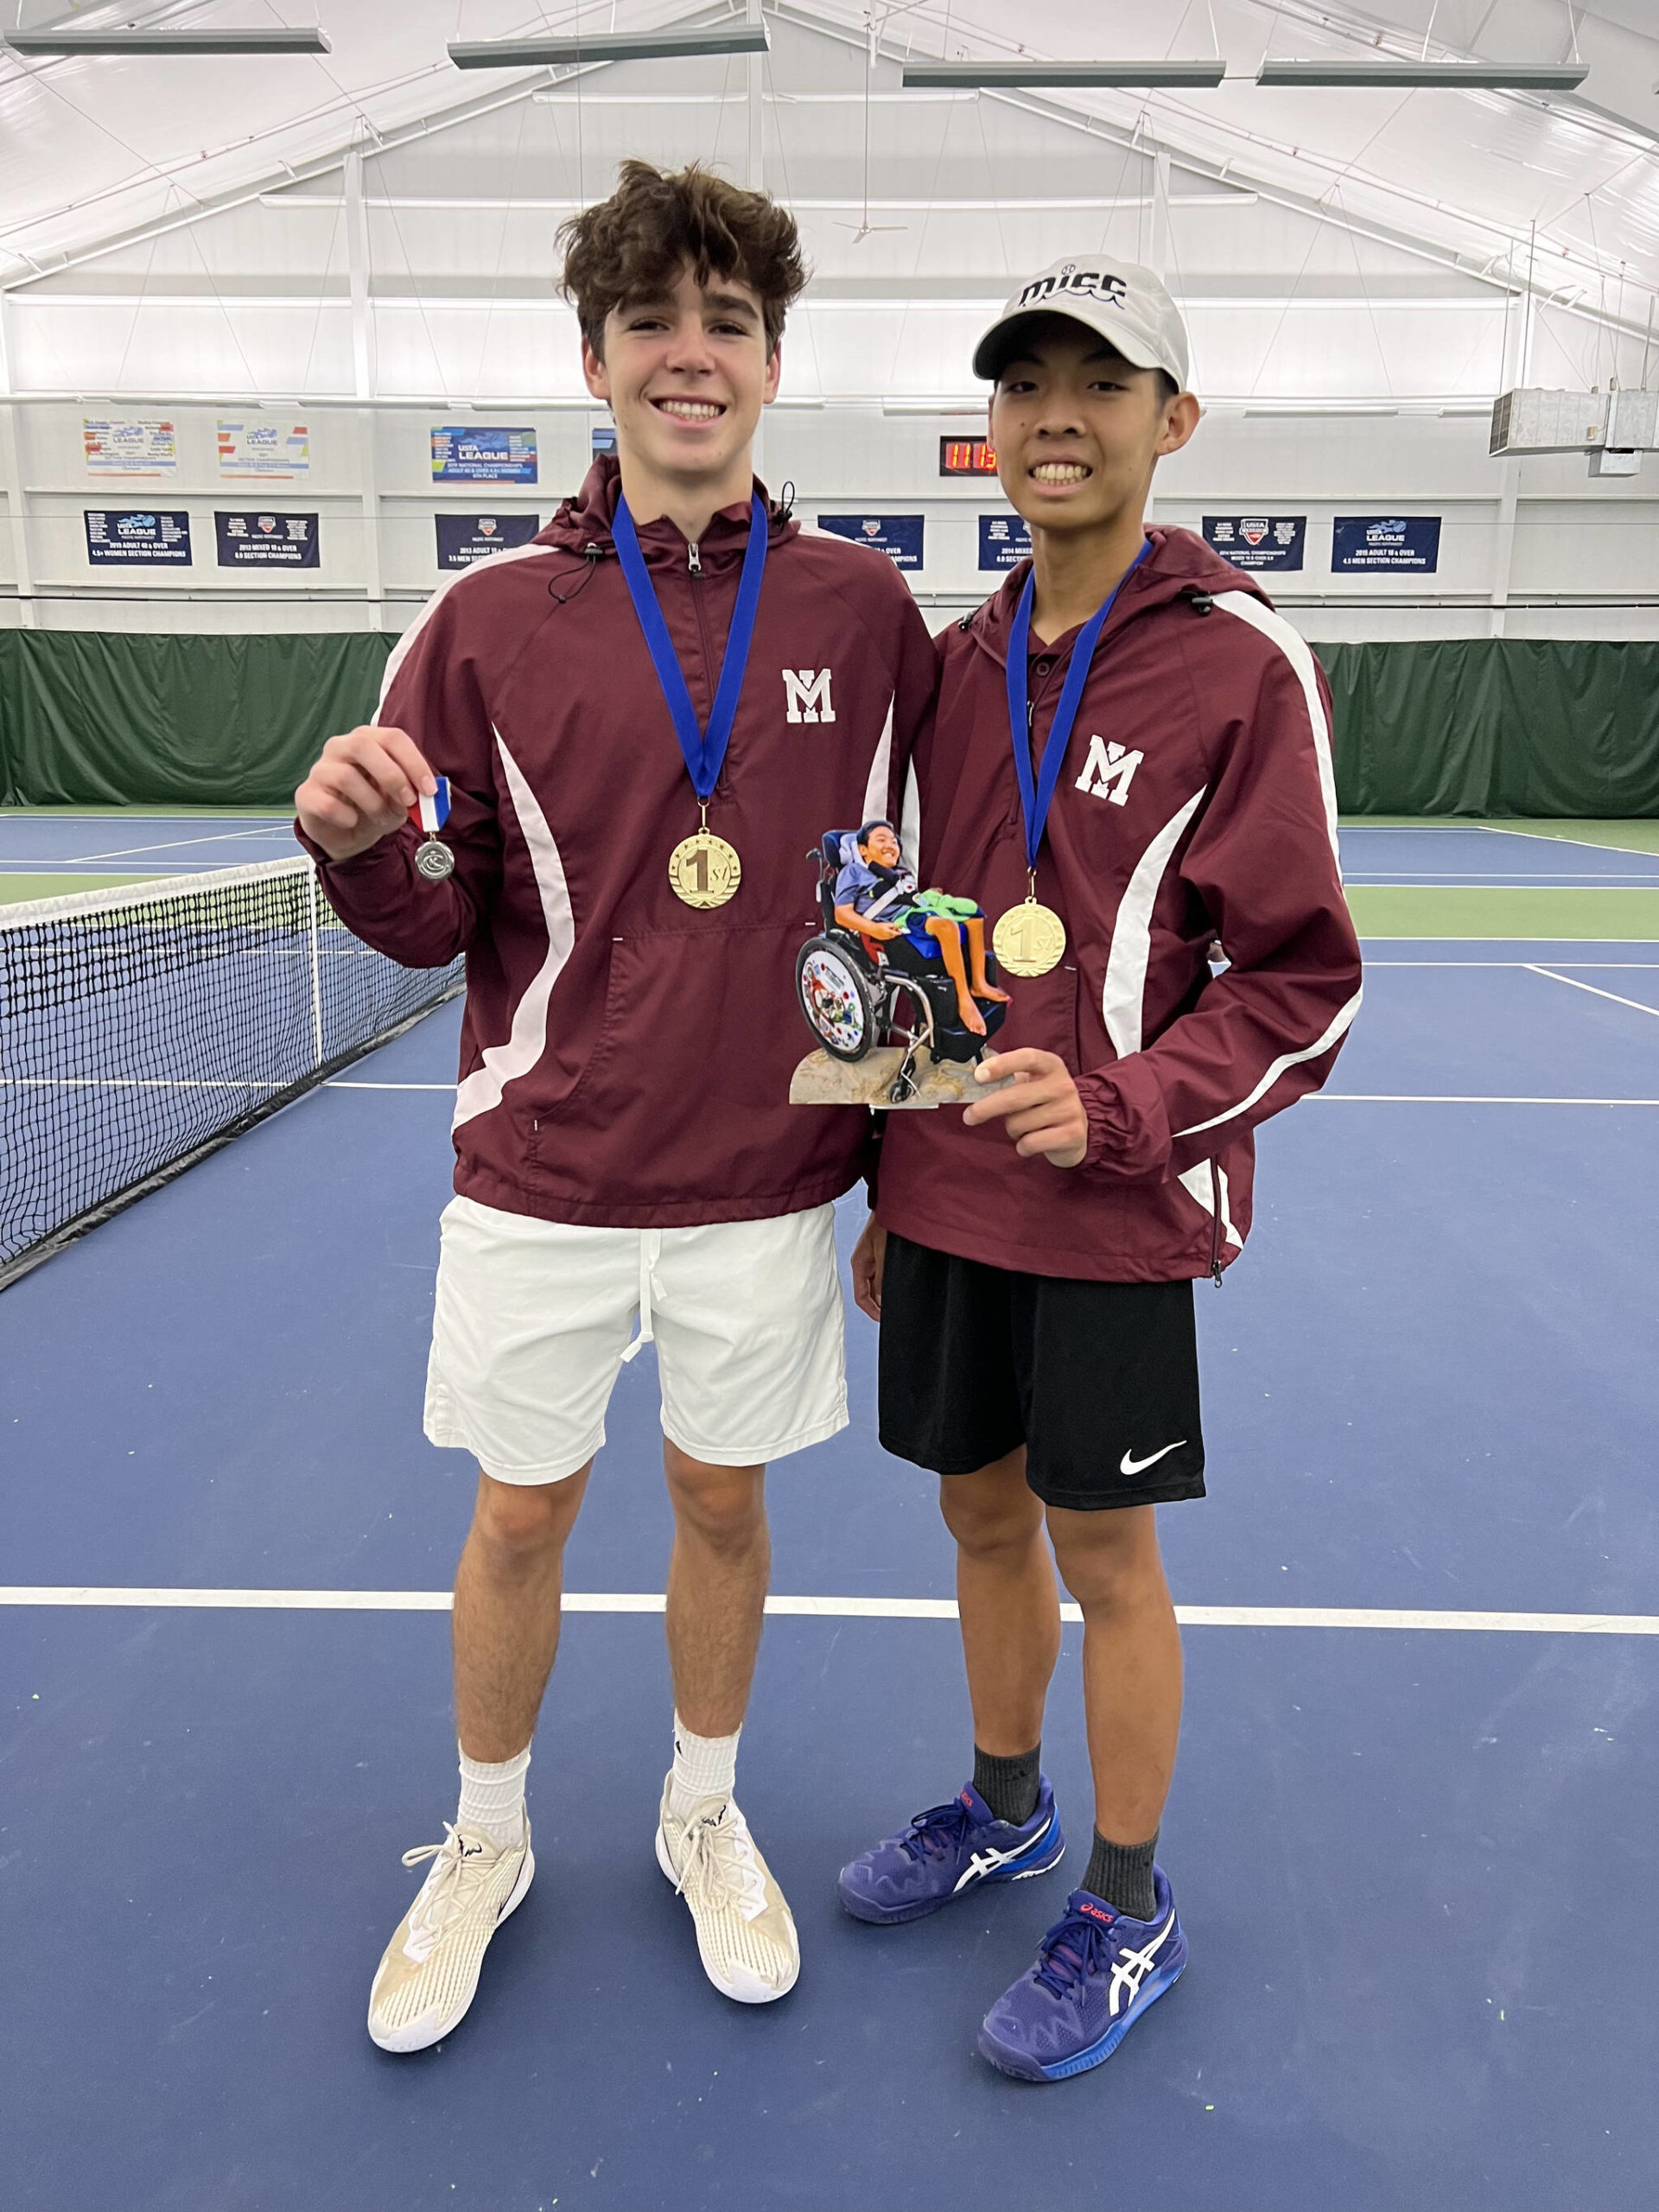 Sam Dilworth, left, and his tennis doubles partner Connor Leung hold a statuette of Aidan Leung, who passed away last May. The Mercer Island High School duo notched first place at the 3A KingCo tournament. Courtesy photo